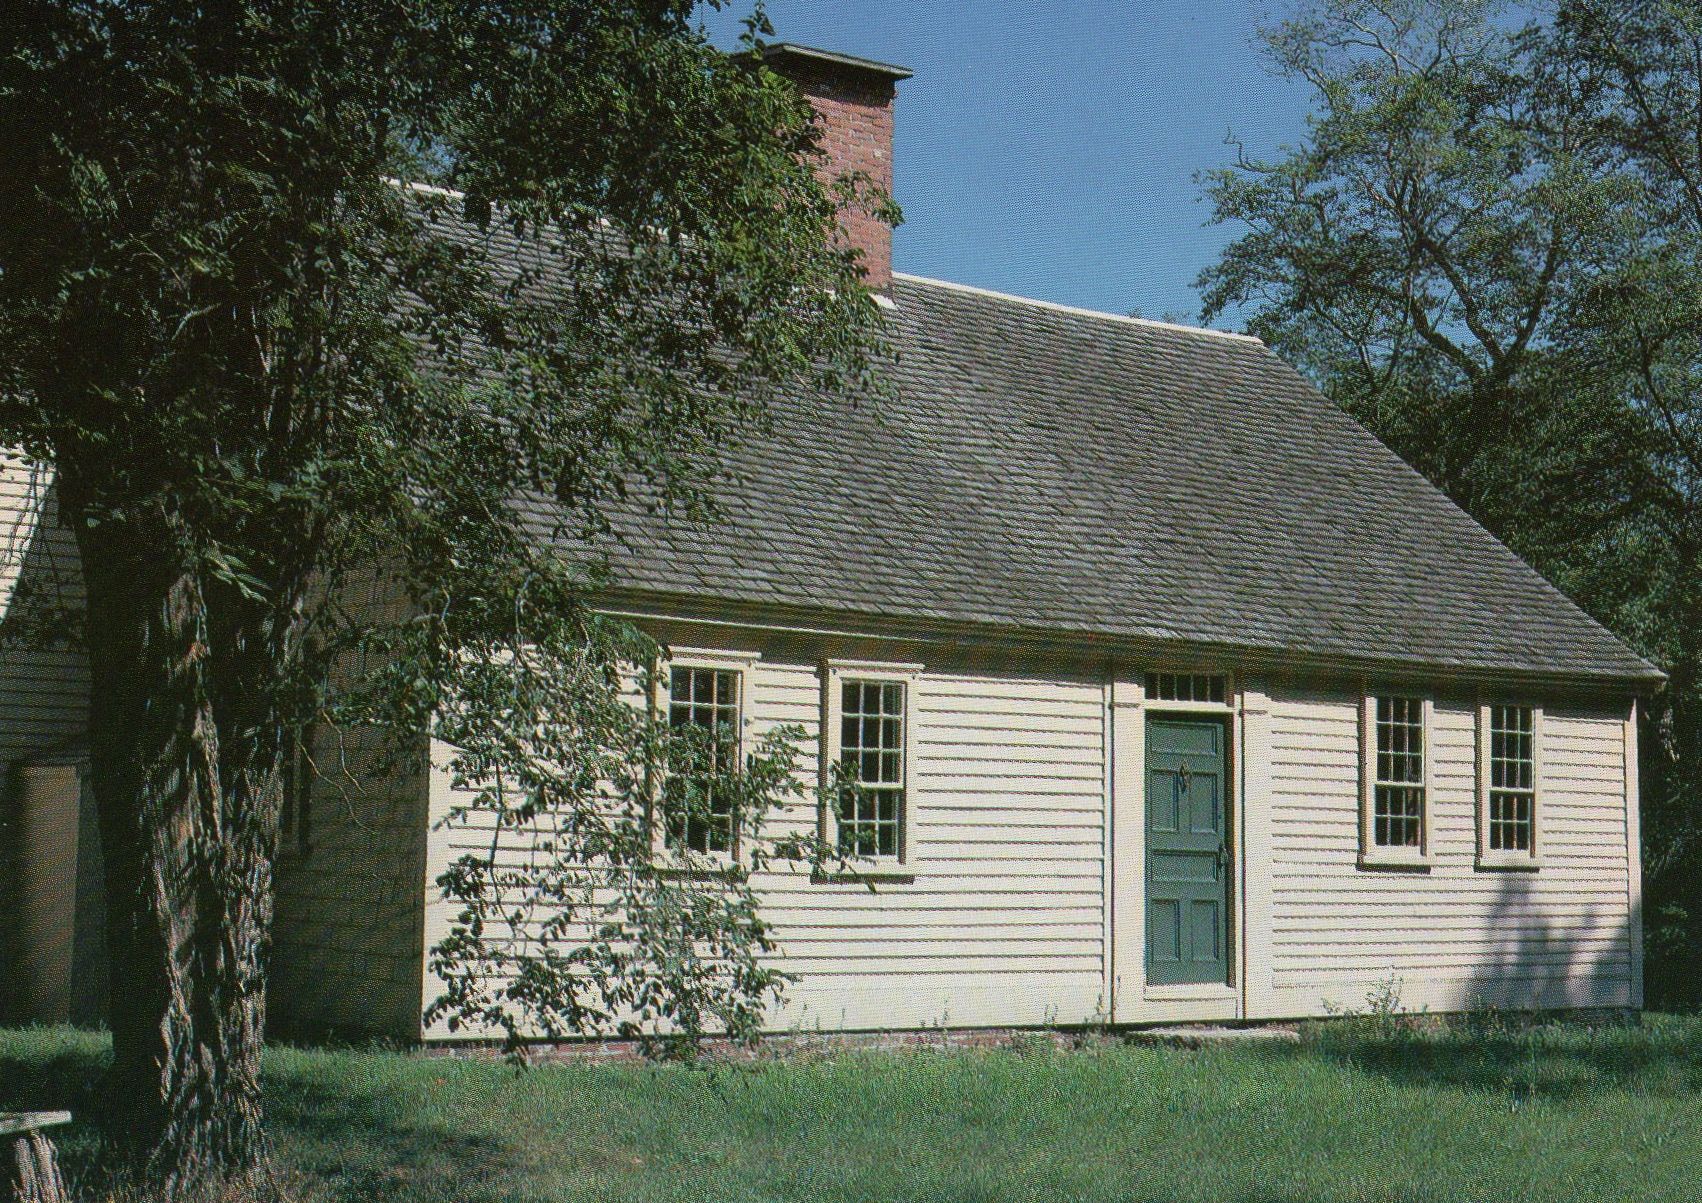 Atwood Higgins House, early 1700's Cape House, Cape Cod, loved the ...